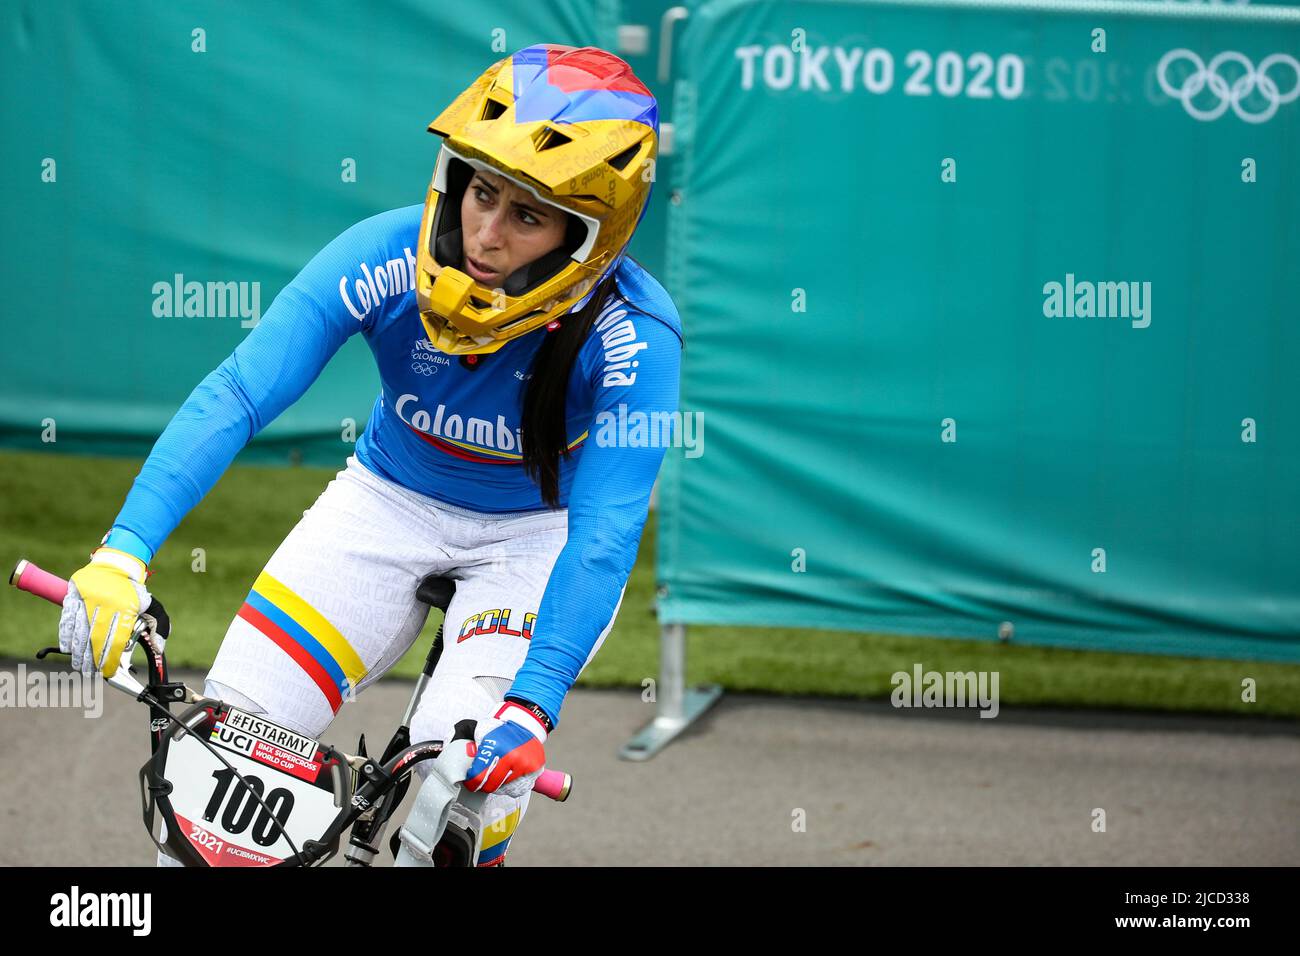 JULY 30th, 2021 - TOKYO, JAPAN: Mariana Pajon of Colombia (100) in action during the Cycling BMX Racing semifinals at the Tokyo 2020 Olympic Games (Ph Stock Photo